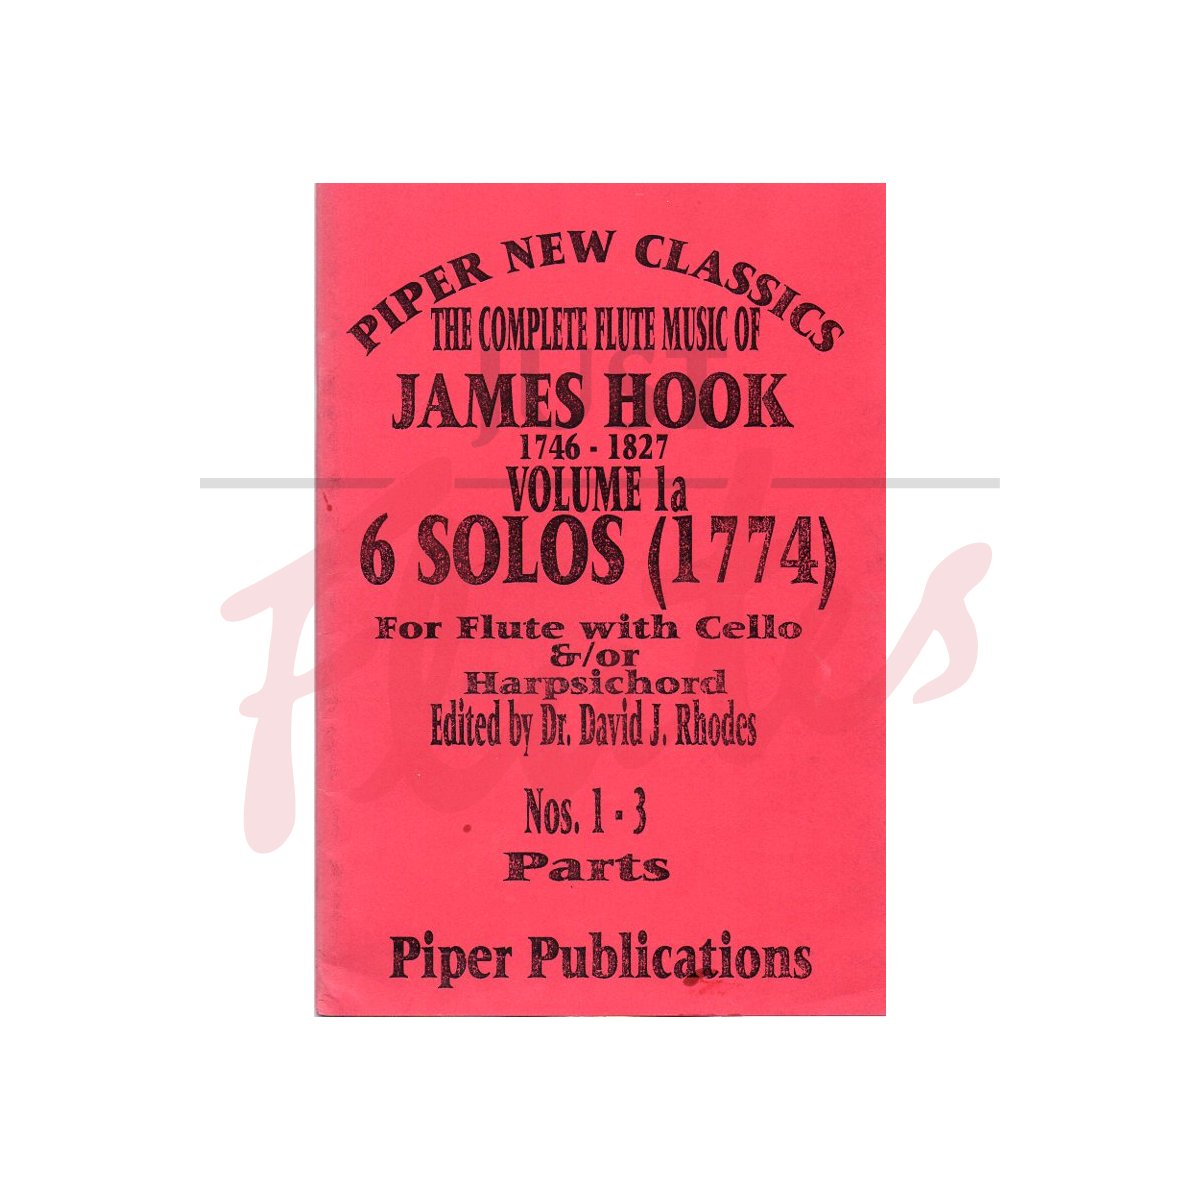 6 Solos (1774) Nos 1-3 Volume 1a for Flute with Cello &amp;/or Harpsichord